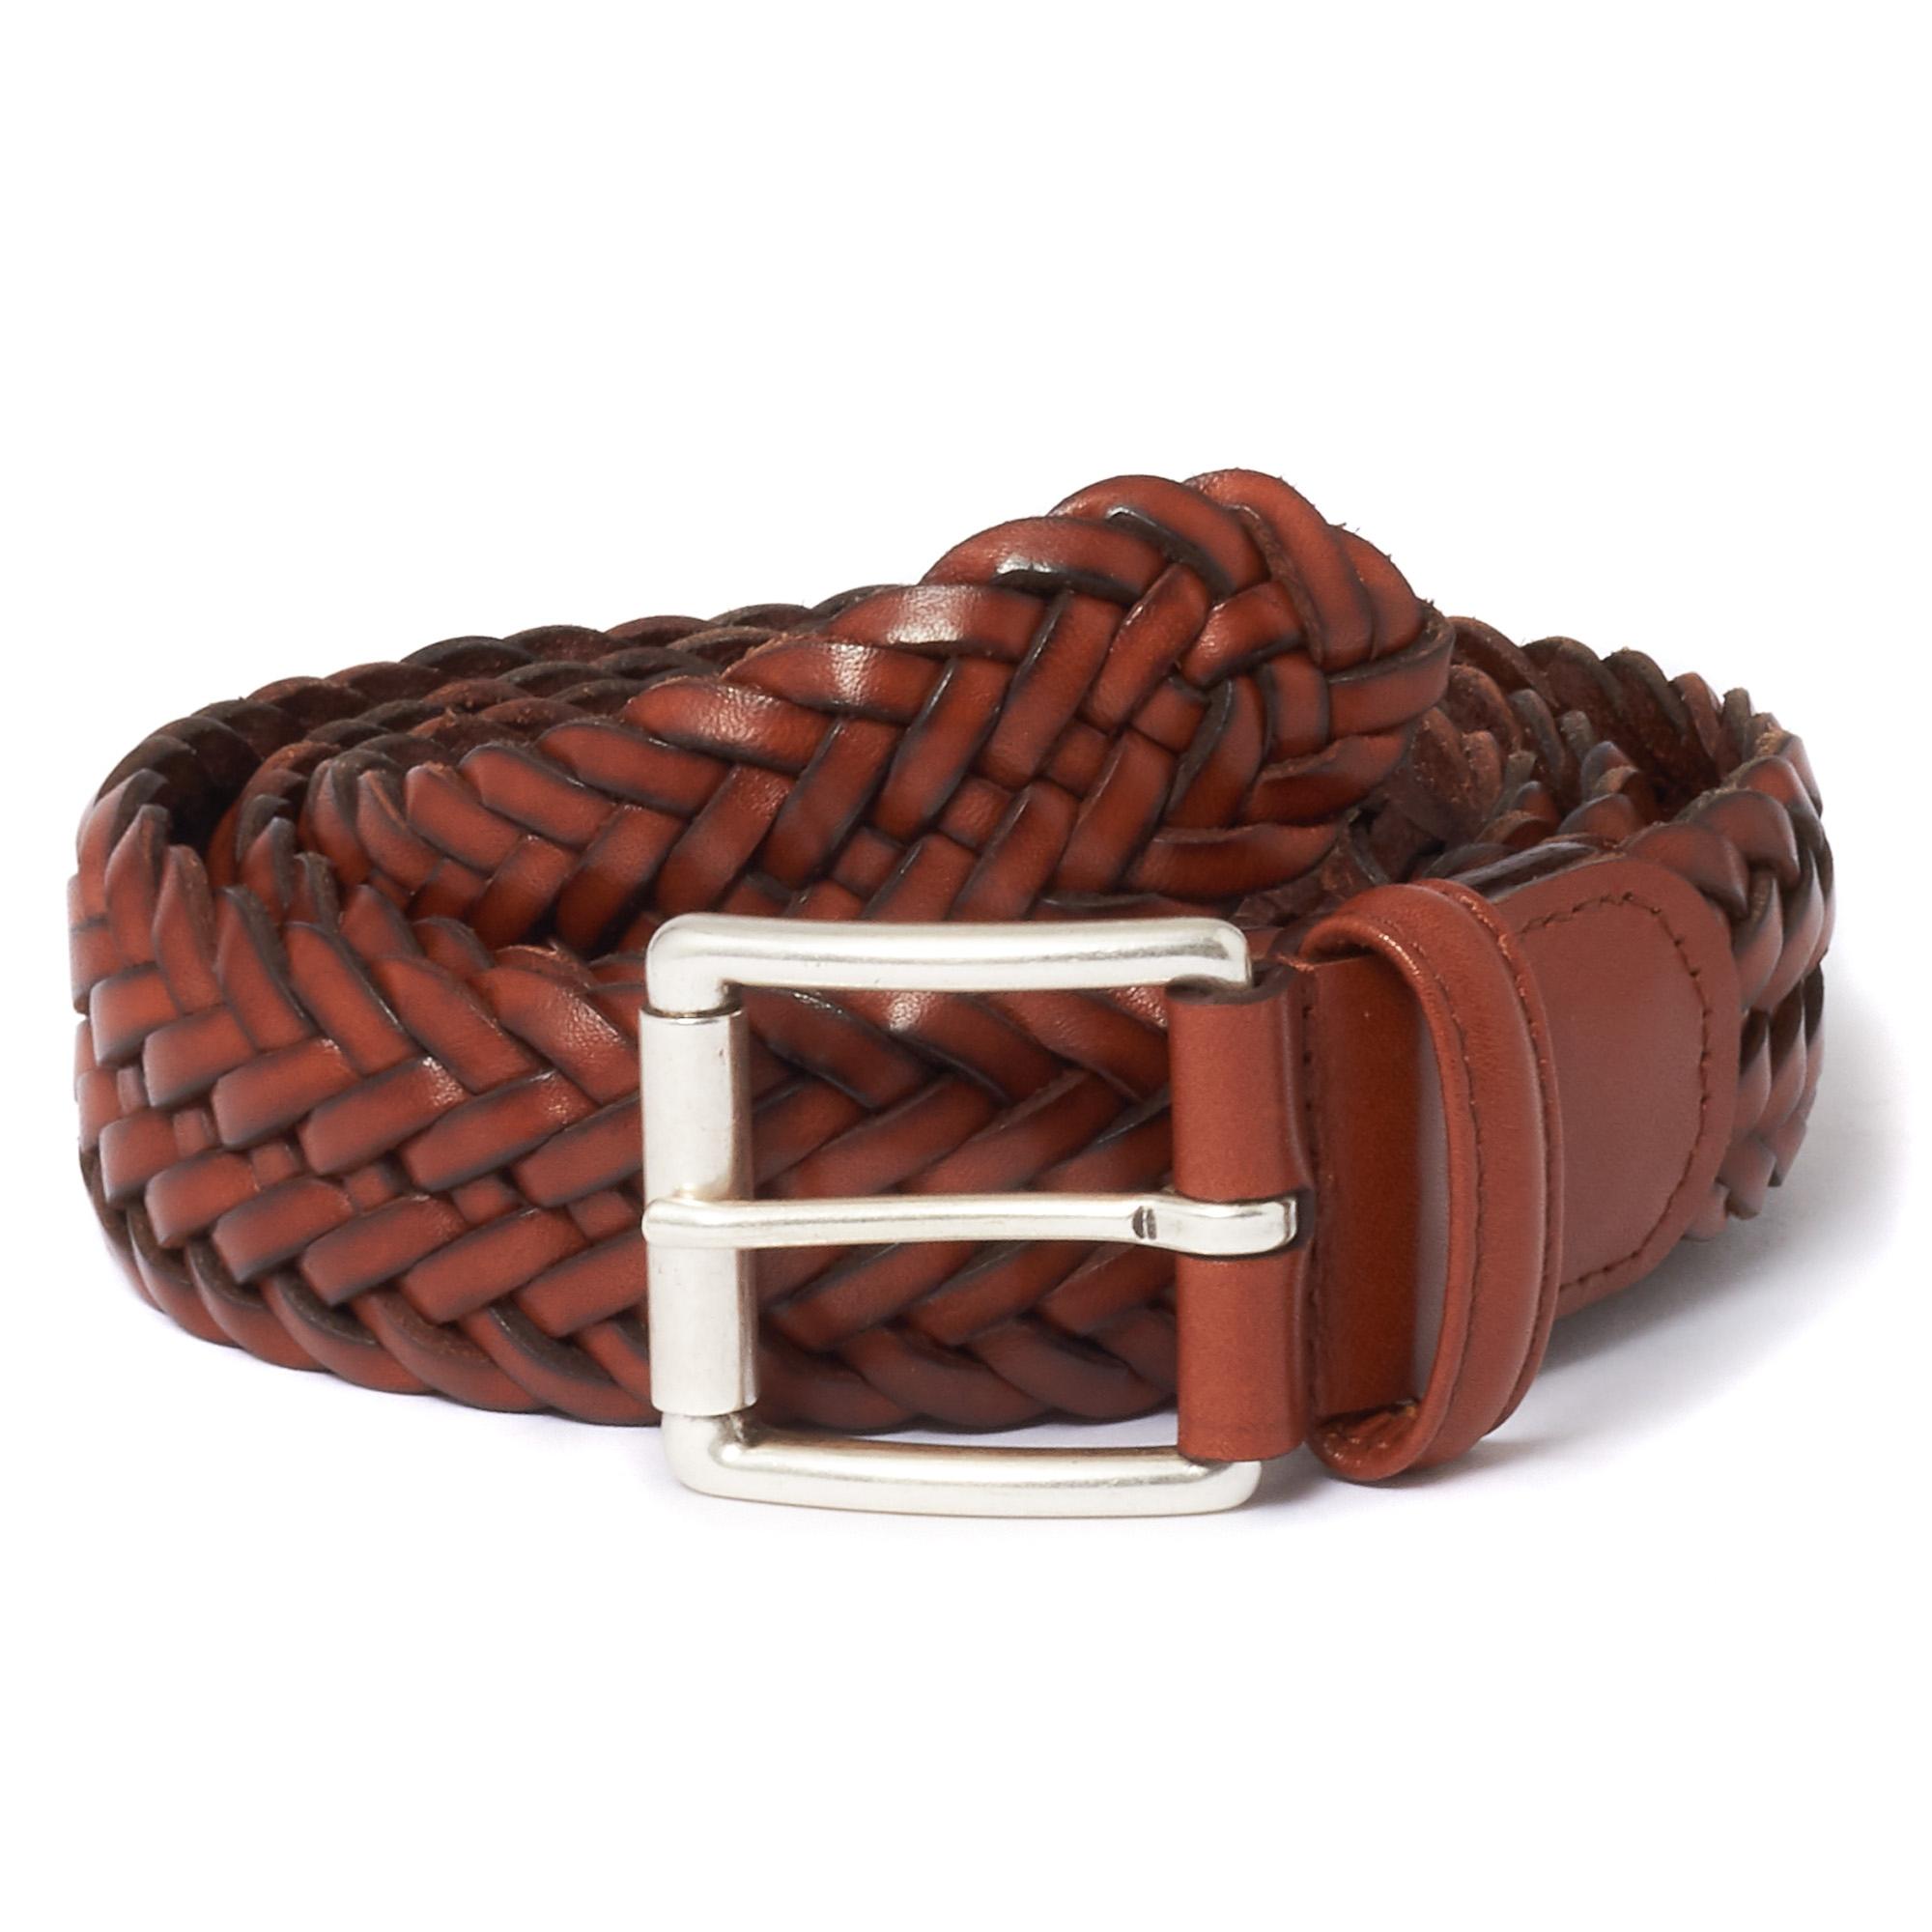 Lyst - Andersons Anderson's Brown Braided Leather Belt in Brown